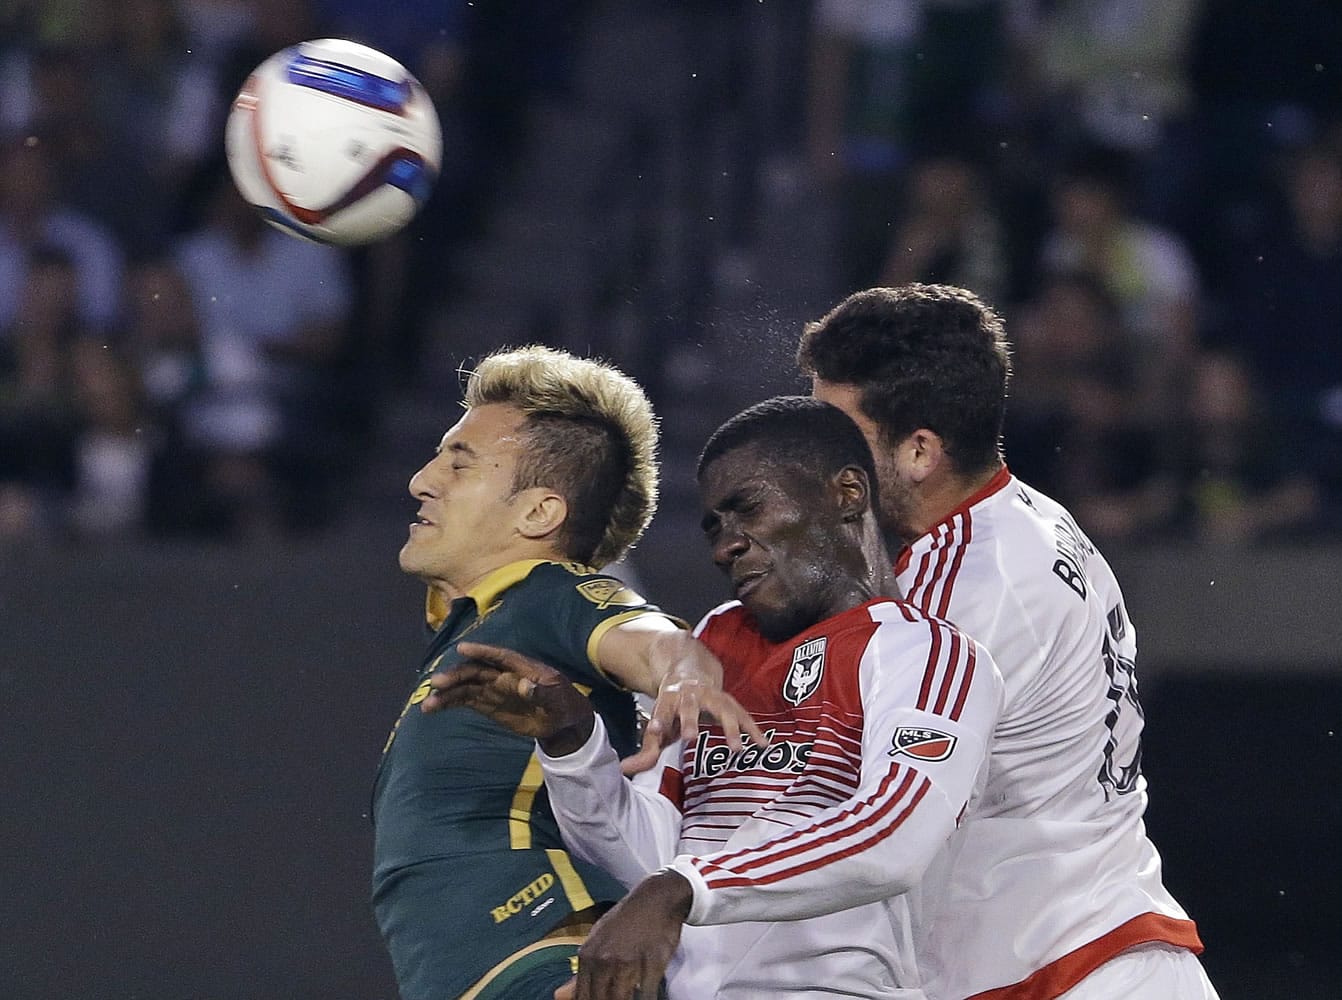 Portland Timbers forward Maximiliano Urruti, left, heads the ball away from D.C. United's Steven Birnbaum, right, and Kofi Opare during the second half of an MLS soccer game in Portland, Ore., Wednesday, May 27, 2015.  Urruti scored Portland's lone goal as Portland won 1-0.